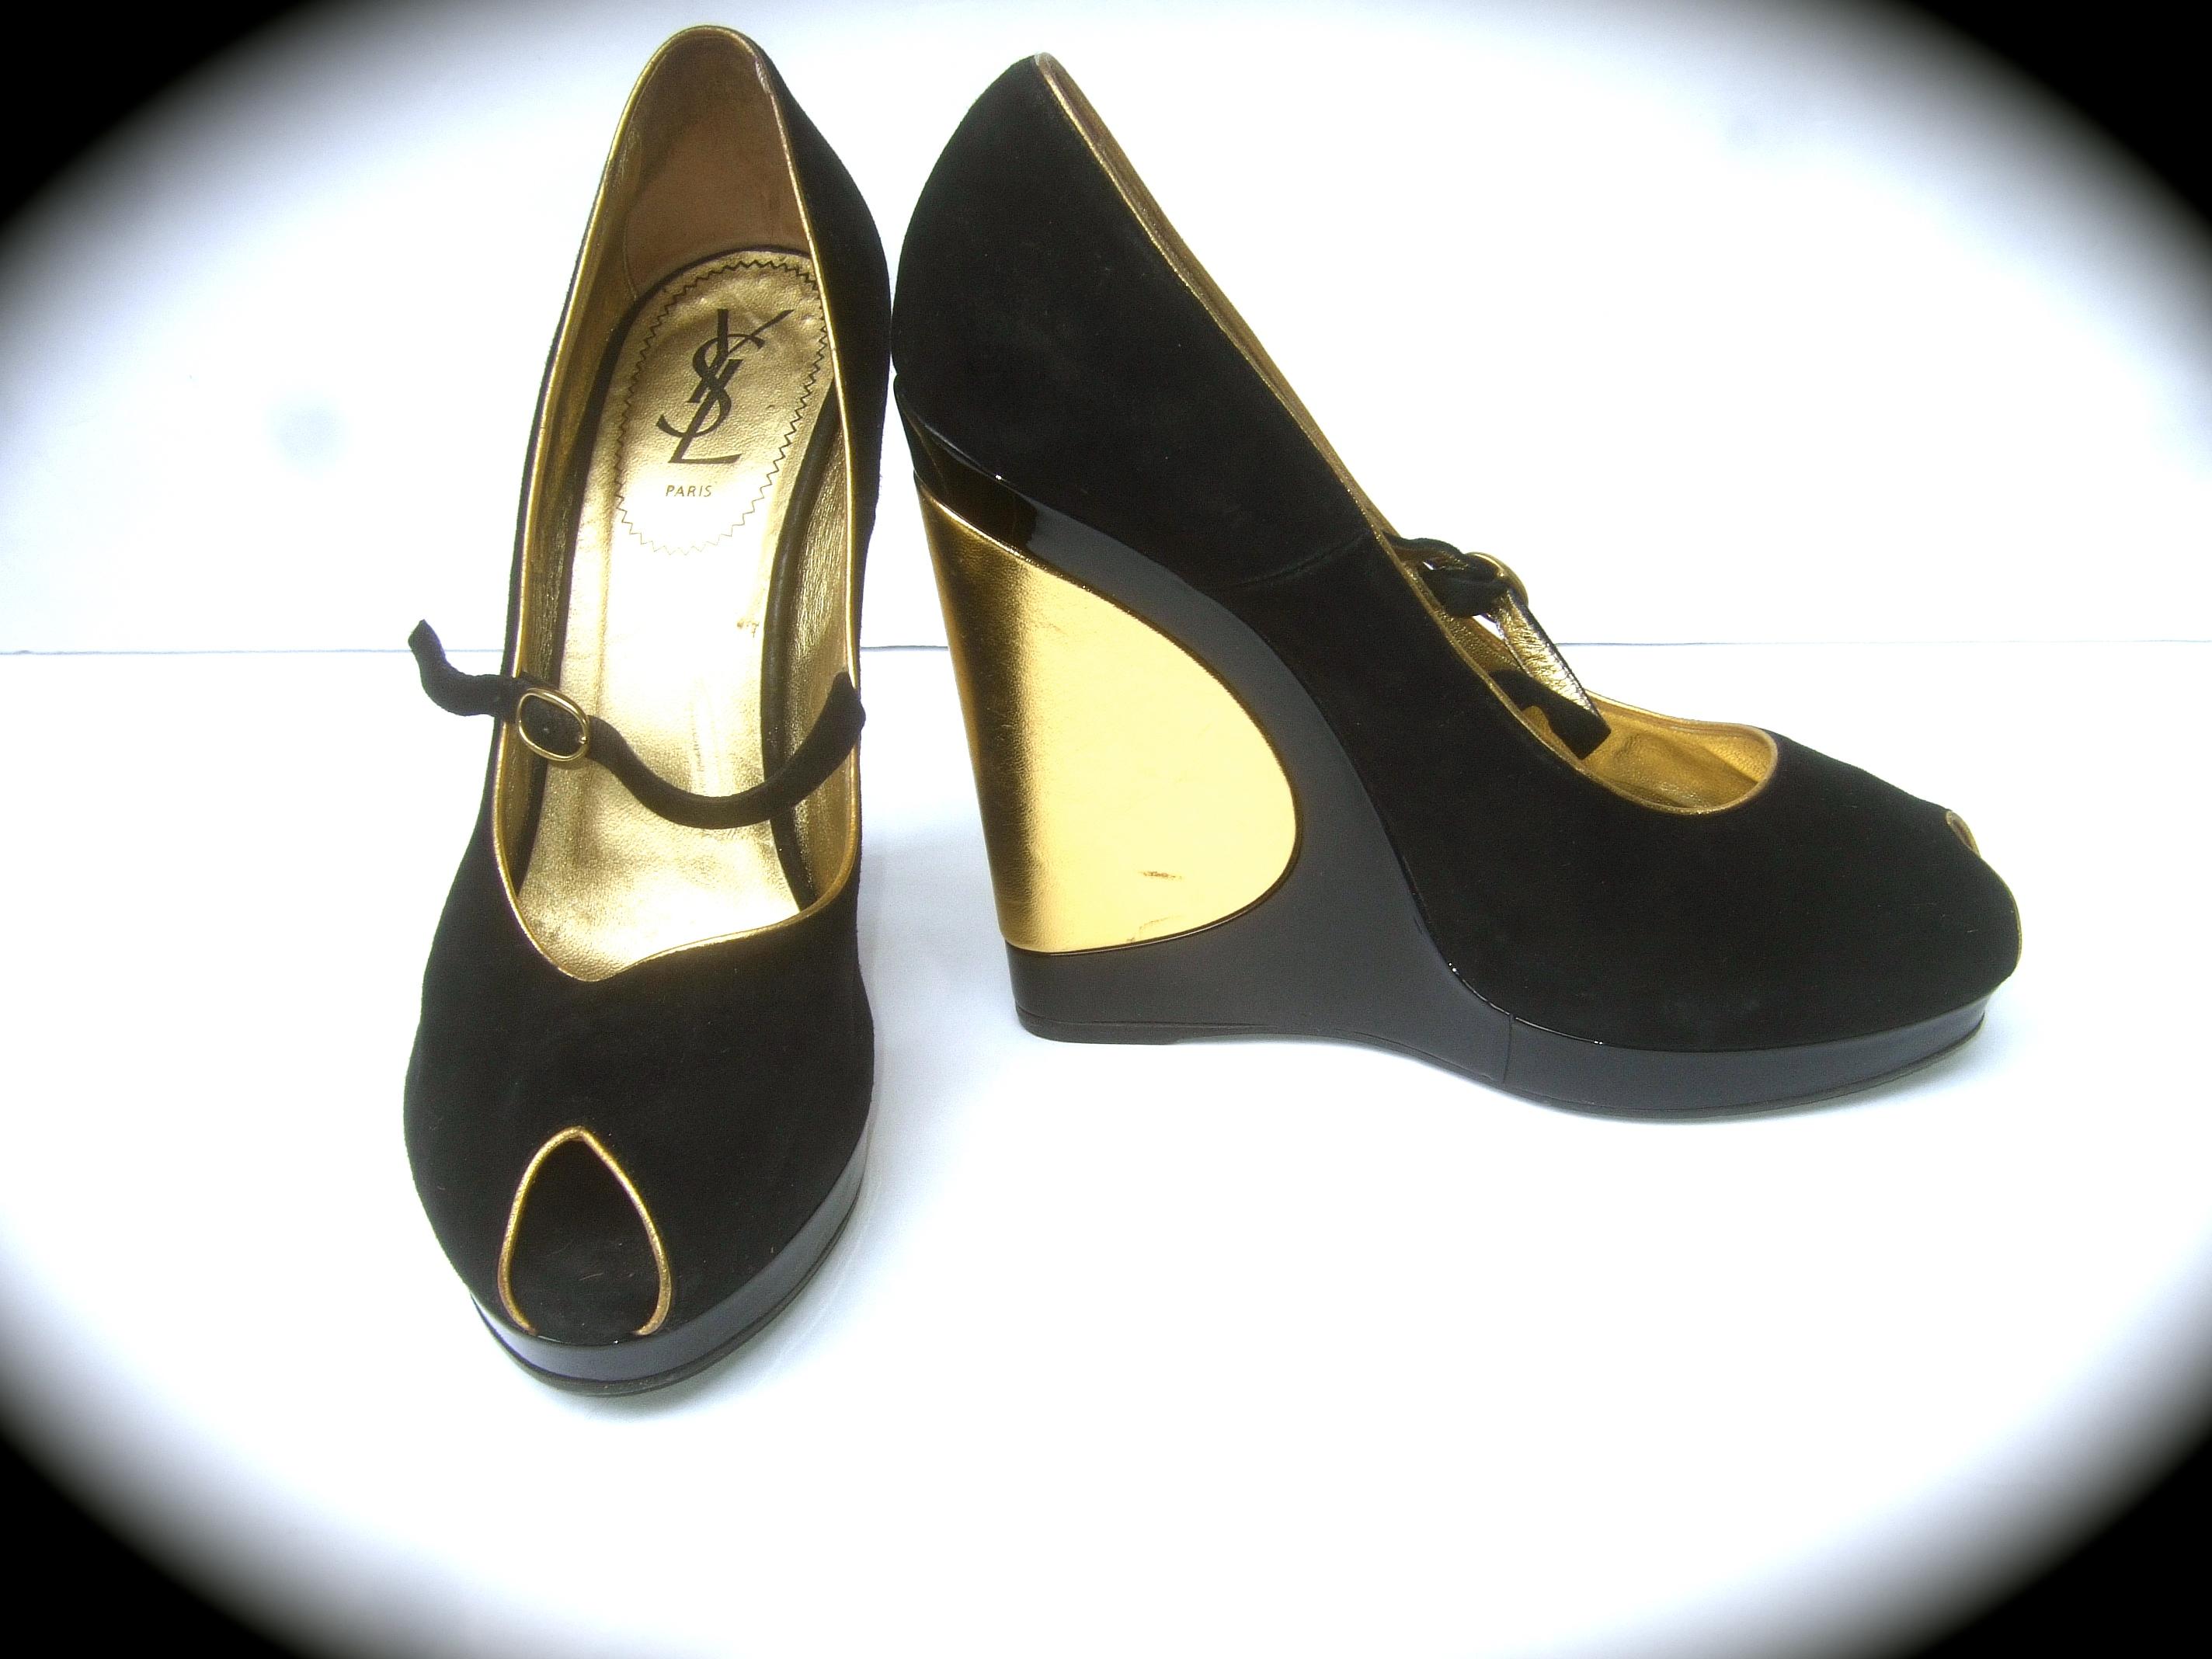 Yves Saint Laurent Paris Black suede & gold leather peep toe Italian wedge platform shoes Size 40 c 21st C

The stylish Italian peep-toe platform wedges are covered with plush black doeskin suede. The sides are designed with shiny black patent